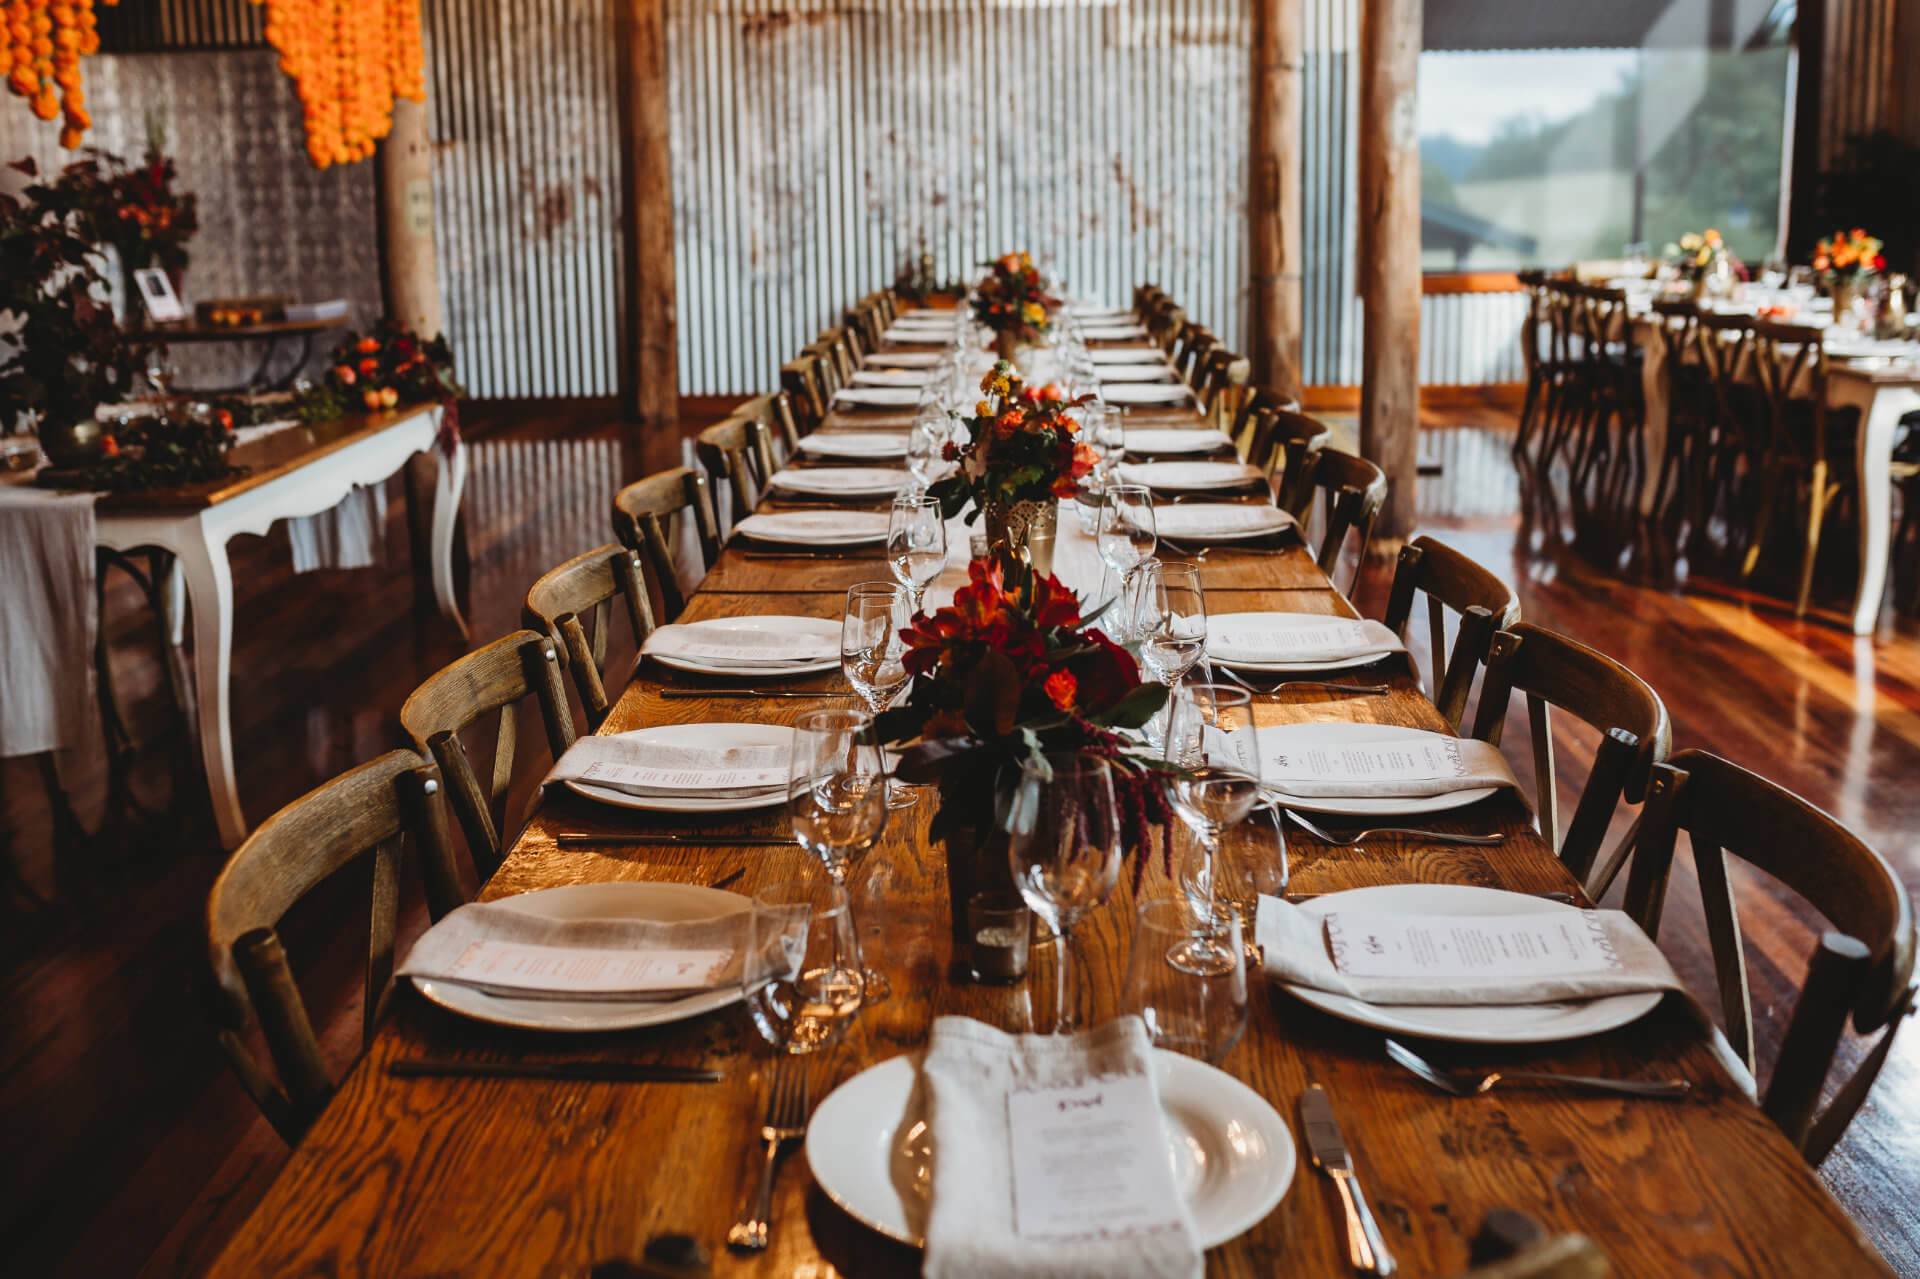 Rustic wedding reception setting with a long wooden table, vintage chairs, and autumnal floral centerpieces